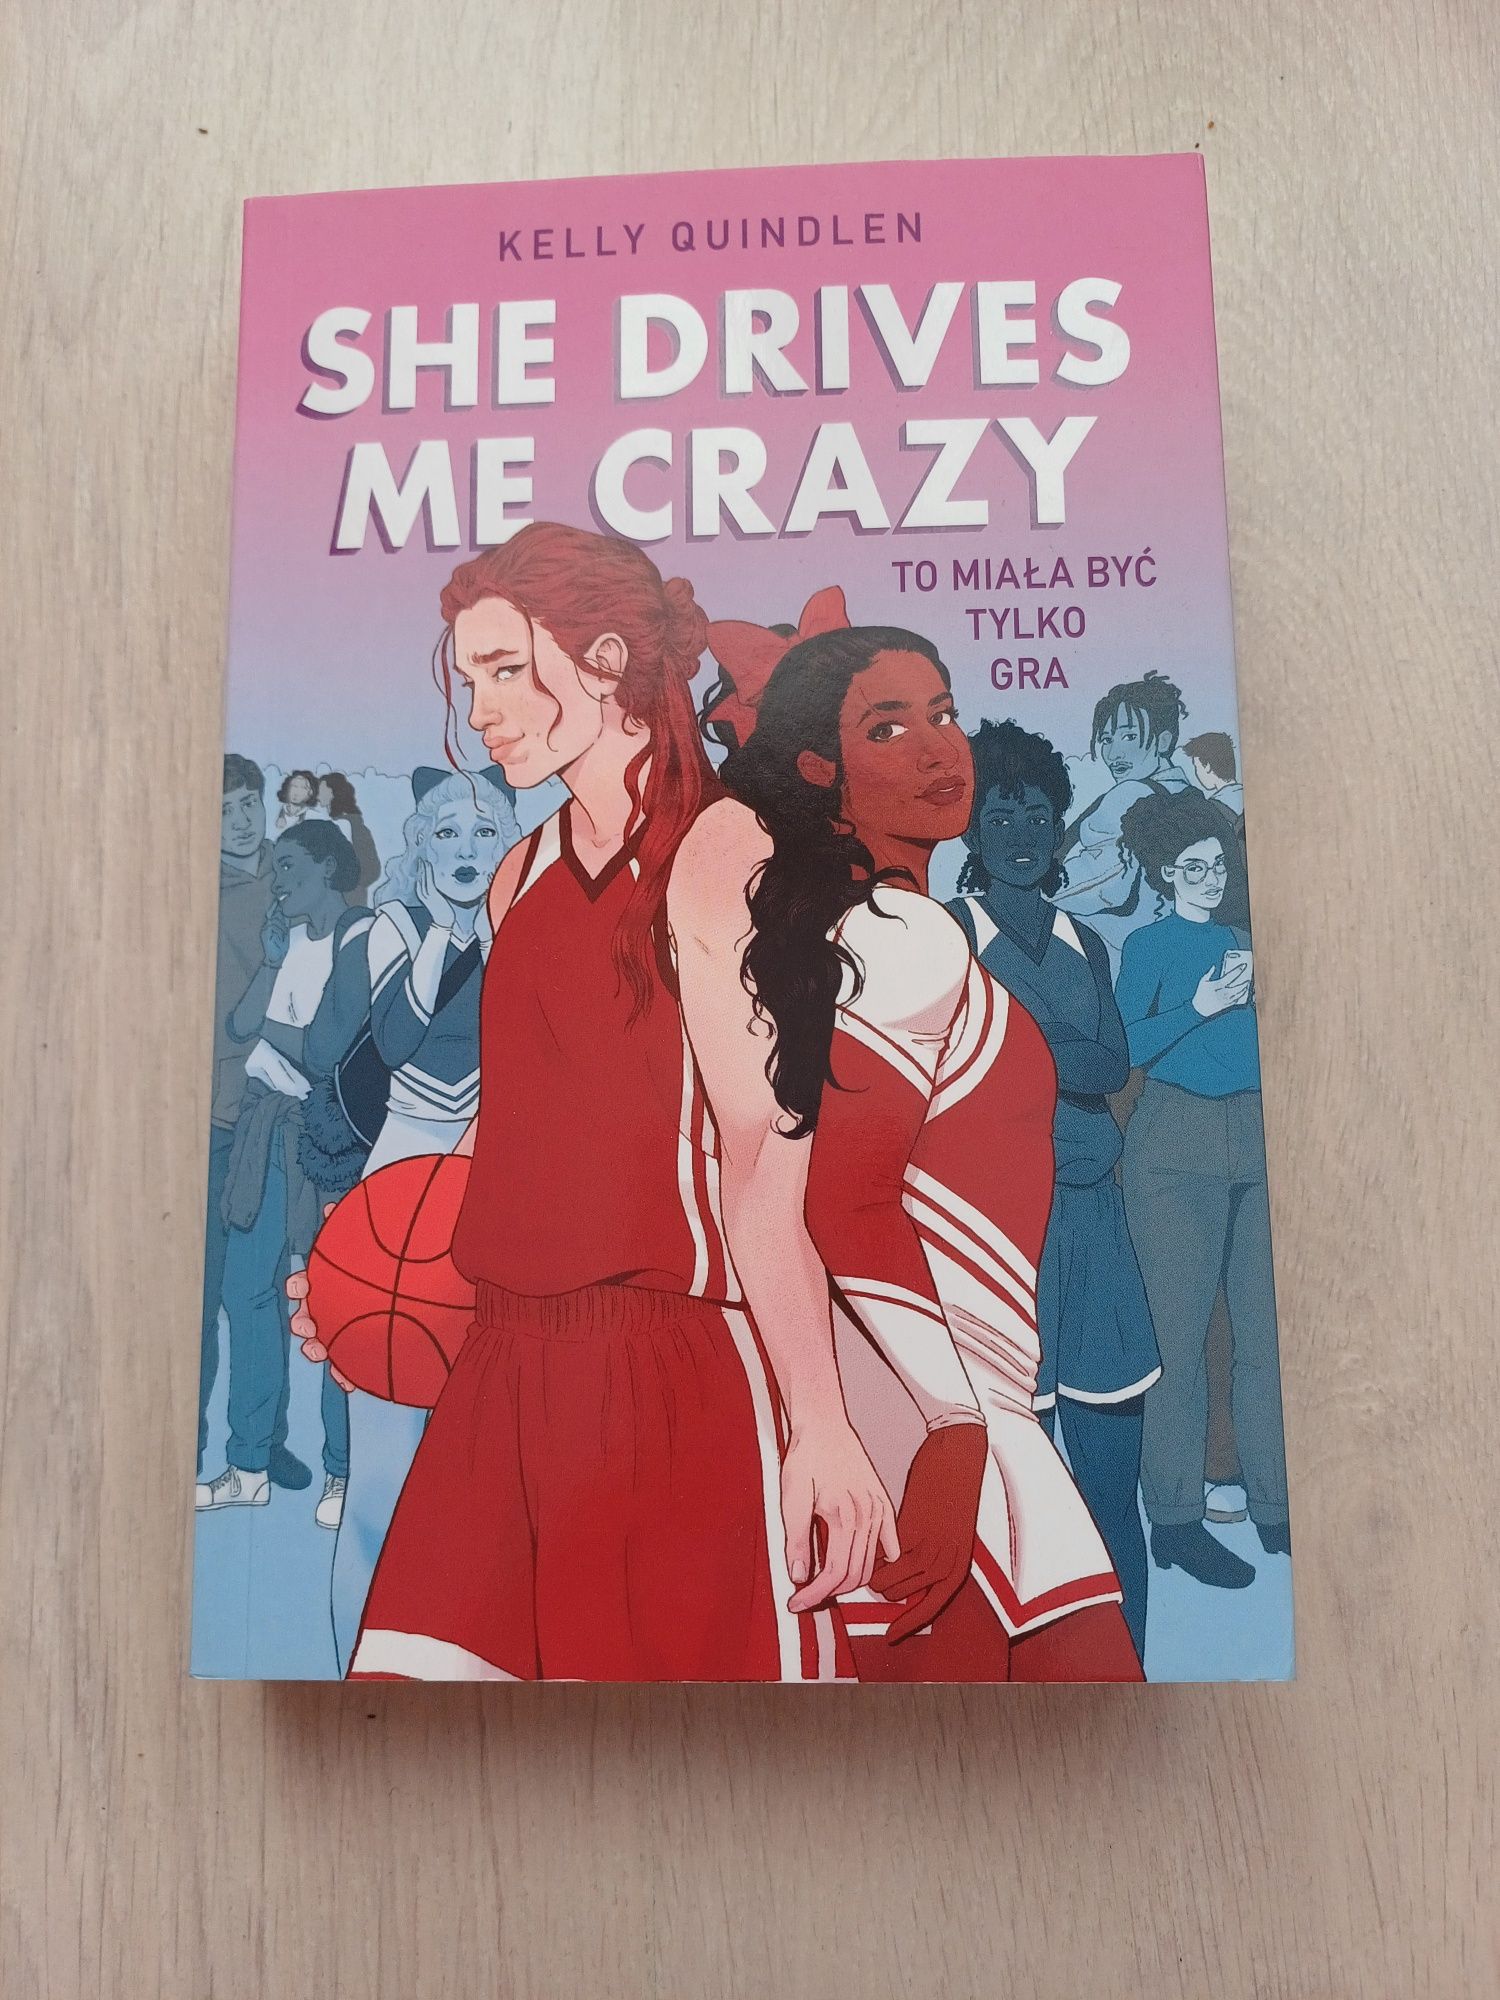 Kelly Quindlen - She drives me crazy